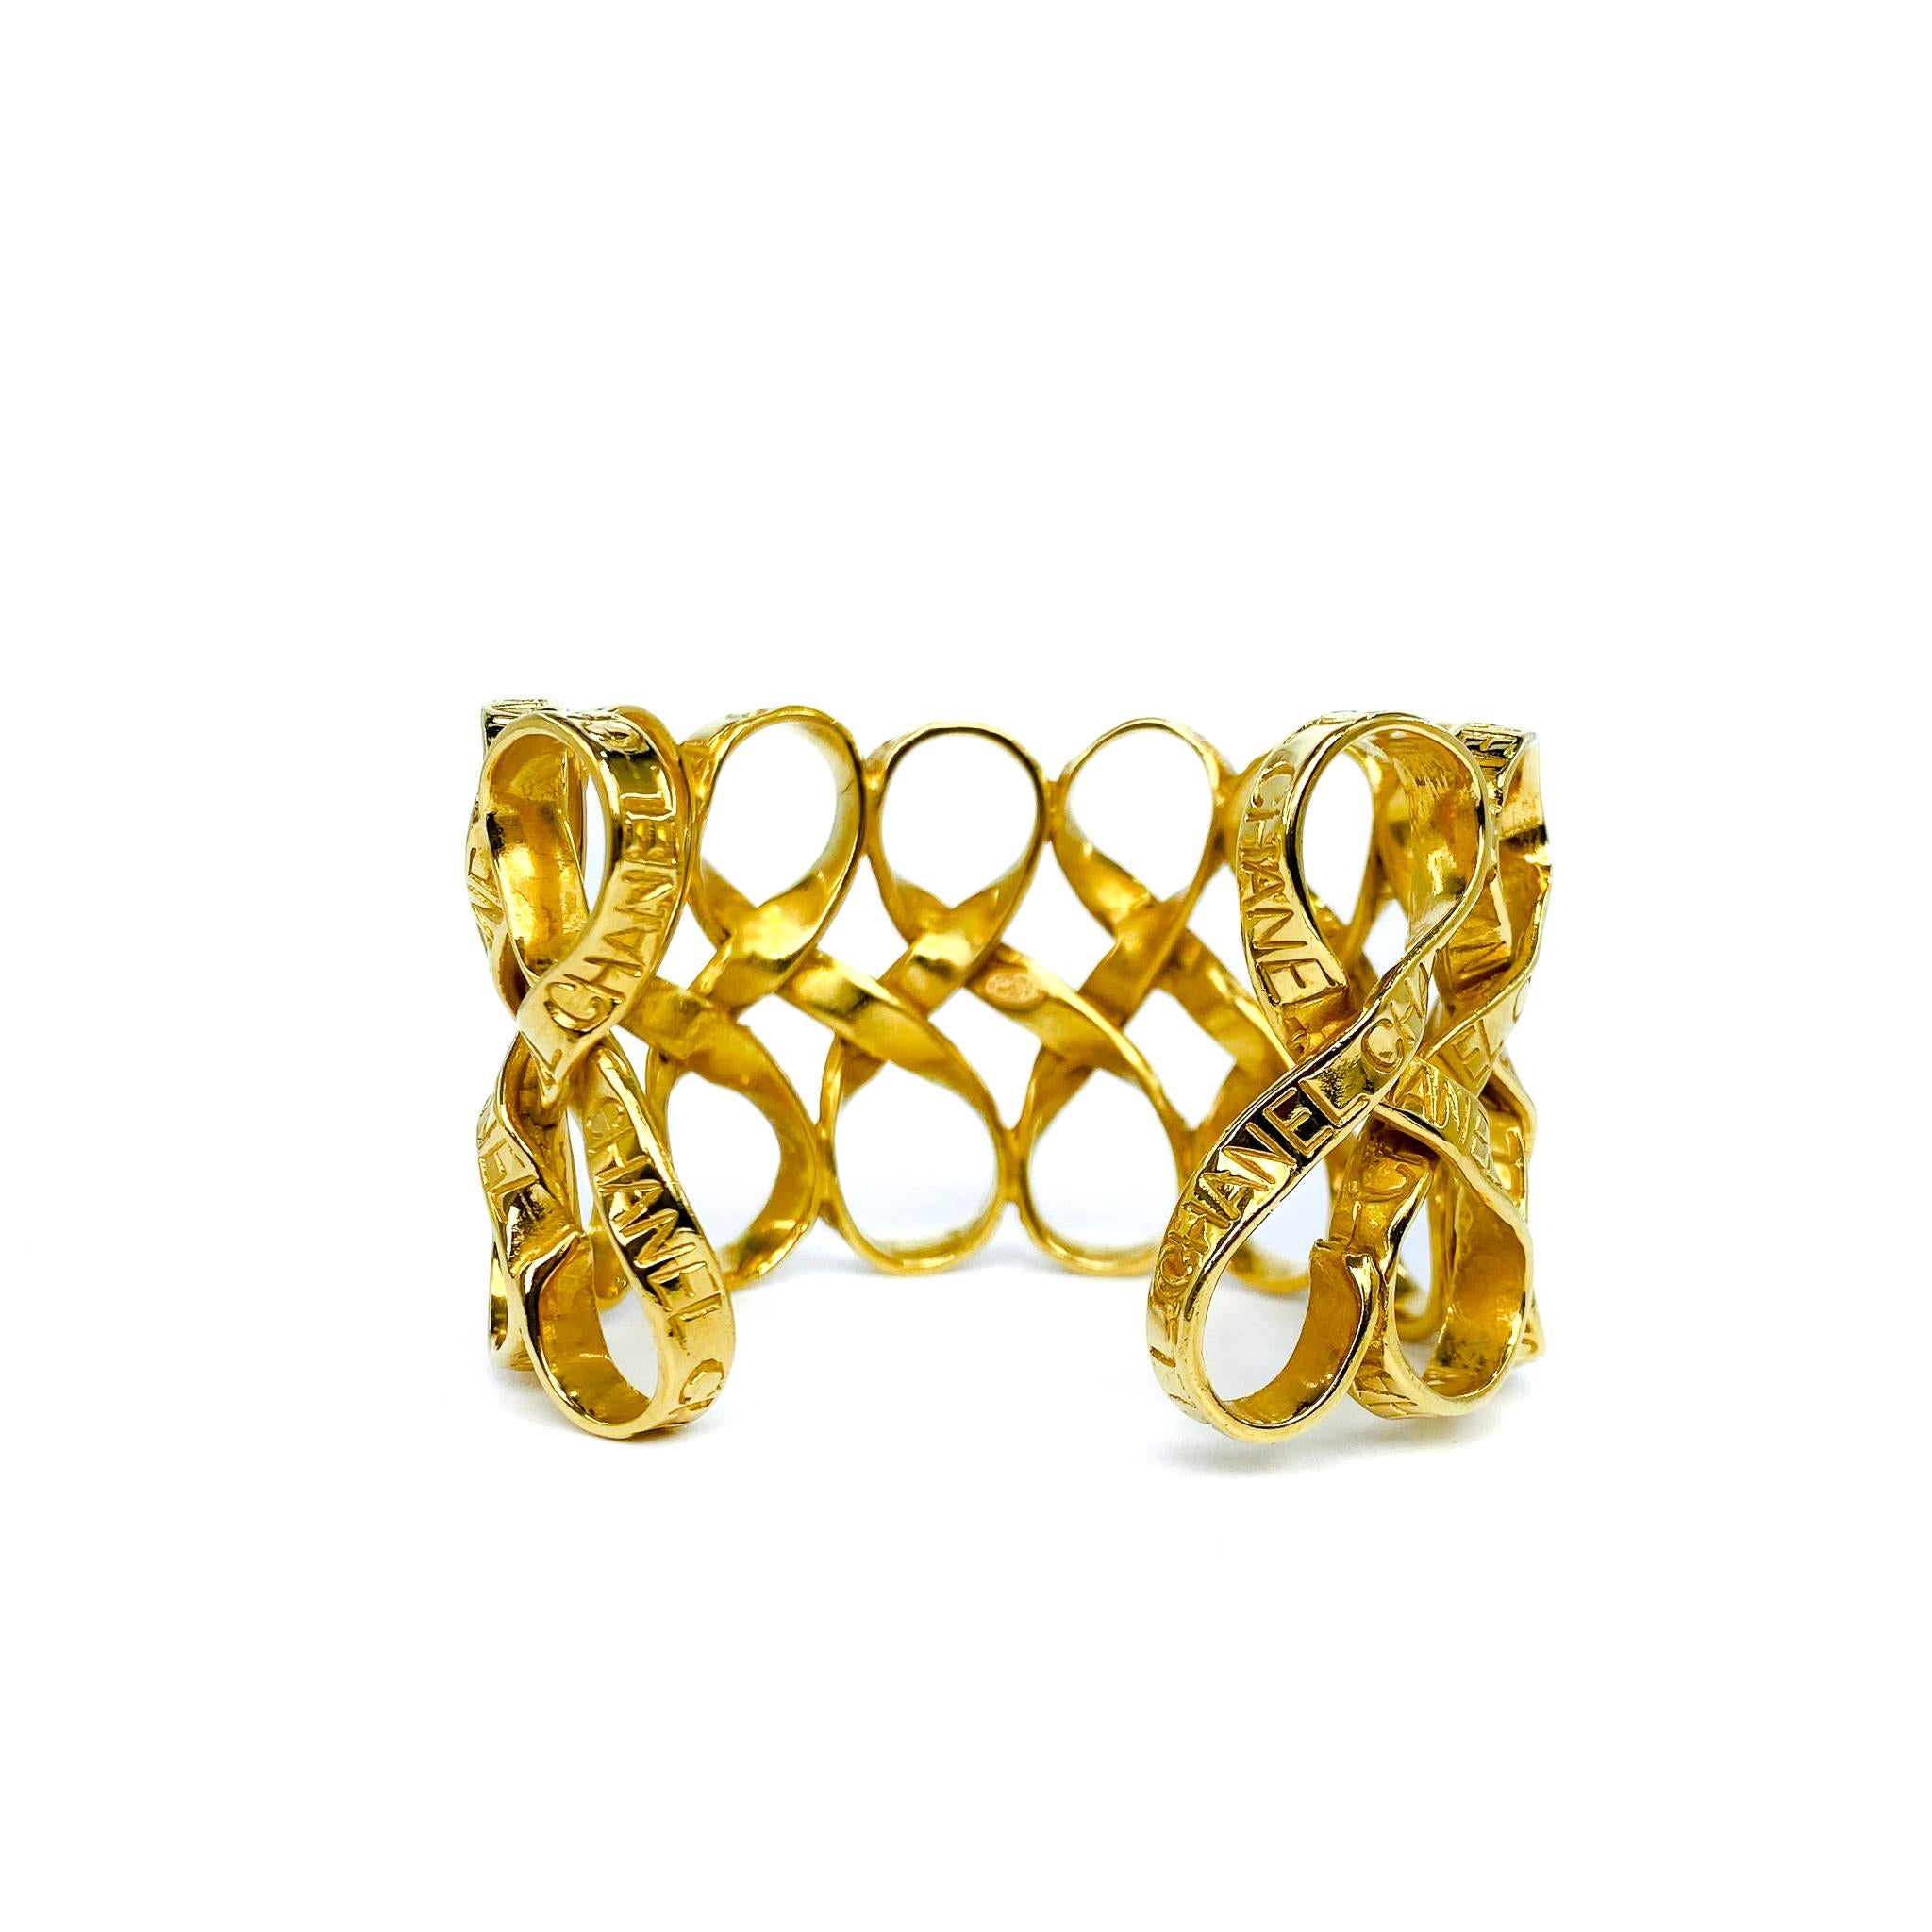 Women's Vintage Chanel 1990s Cuff Bracelet - 1996 Spring Collection